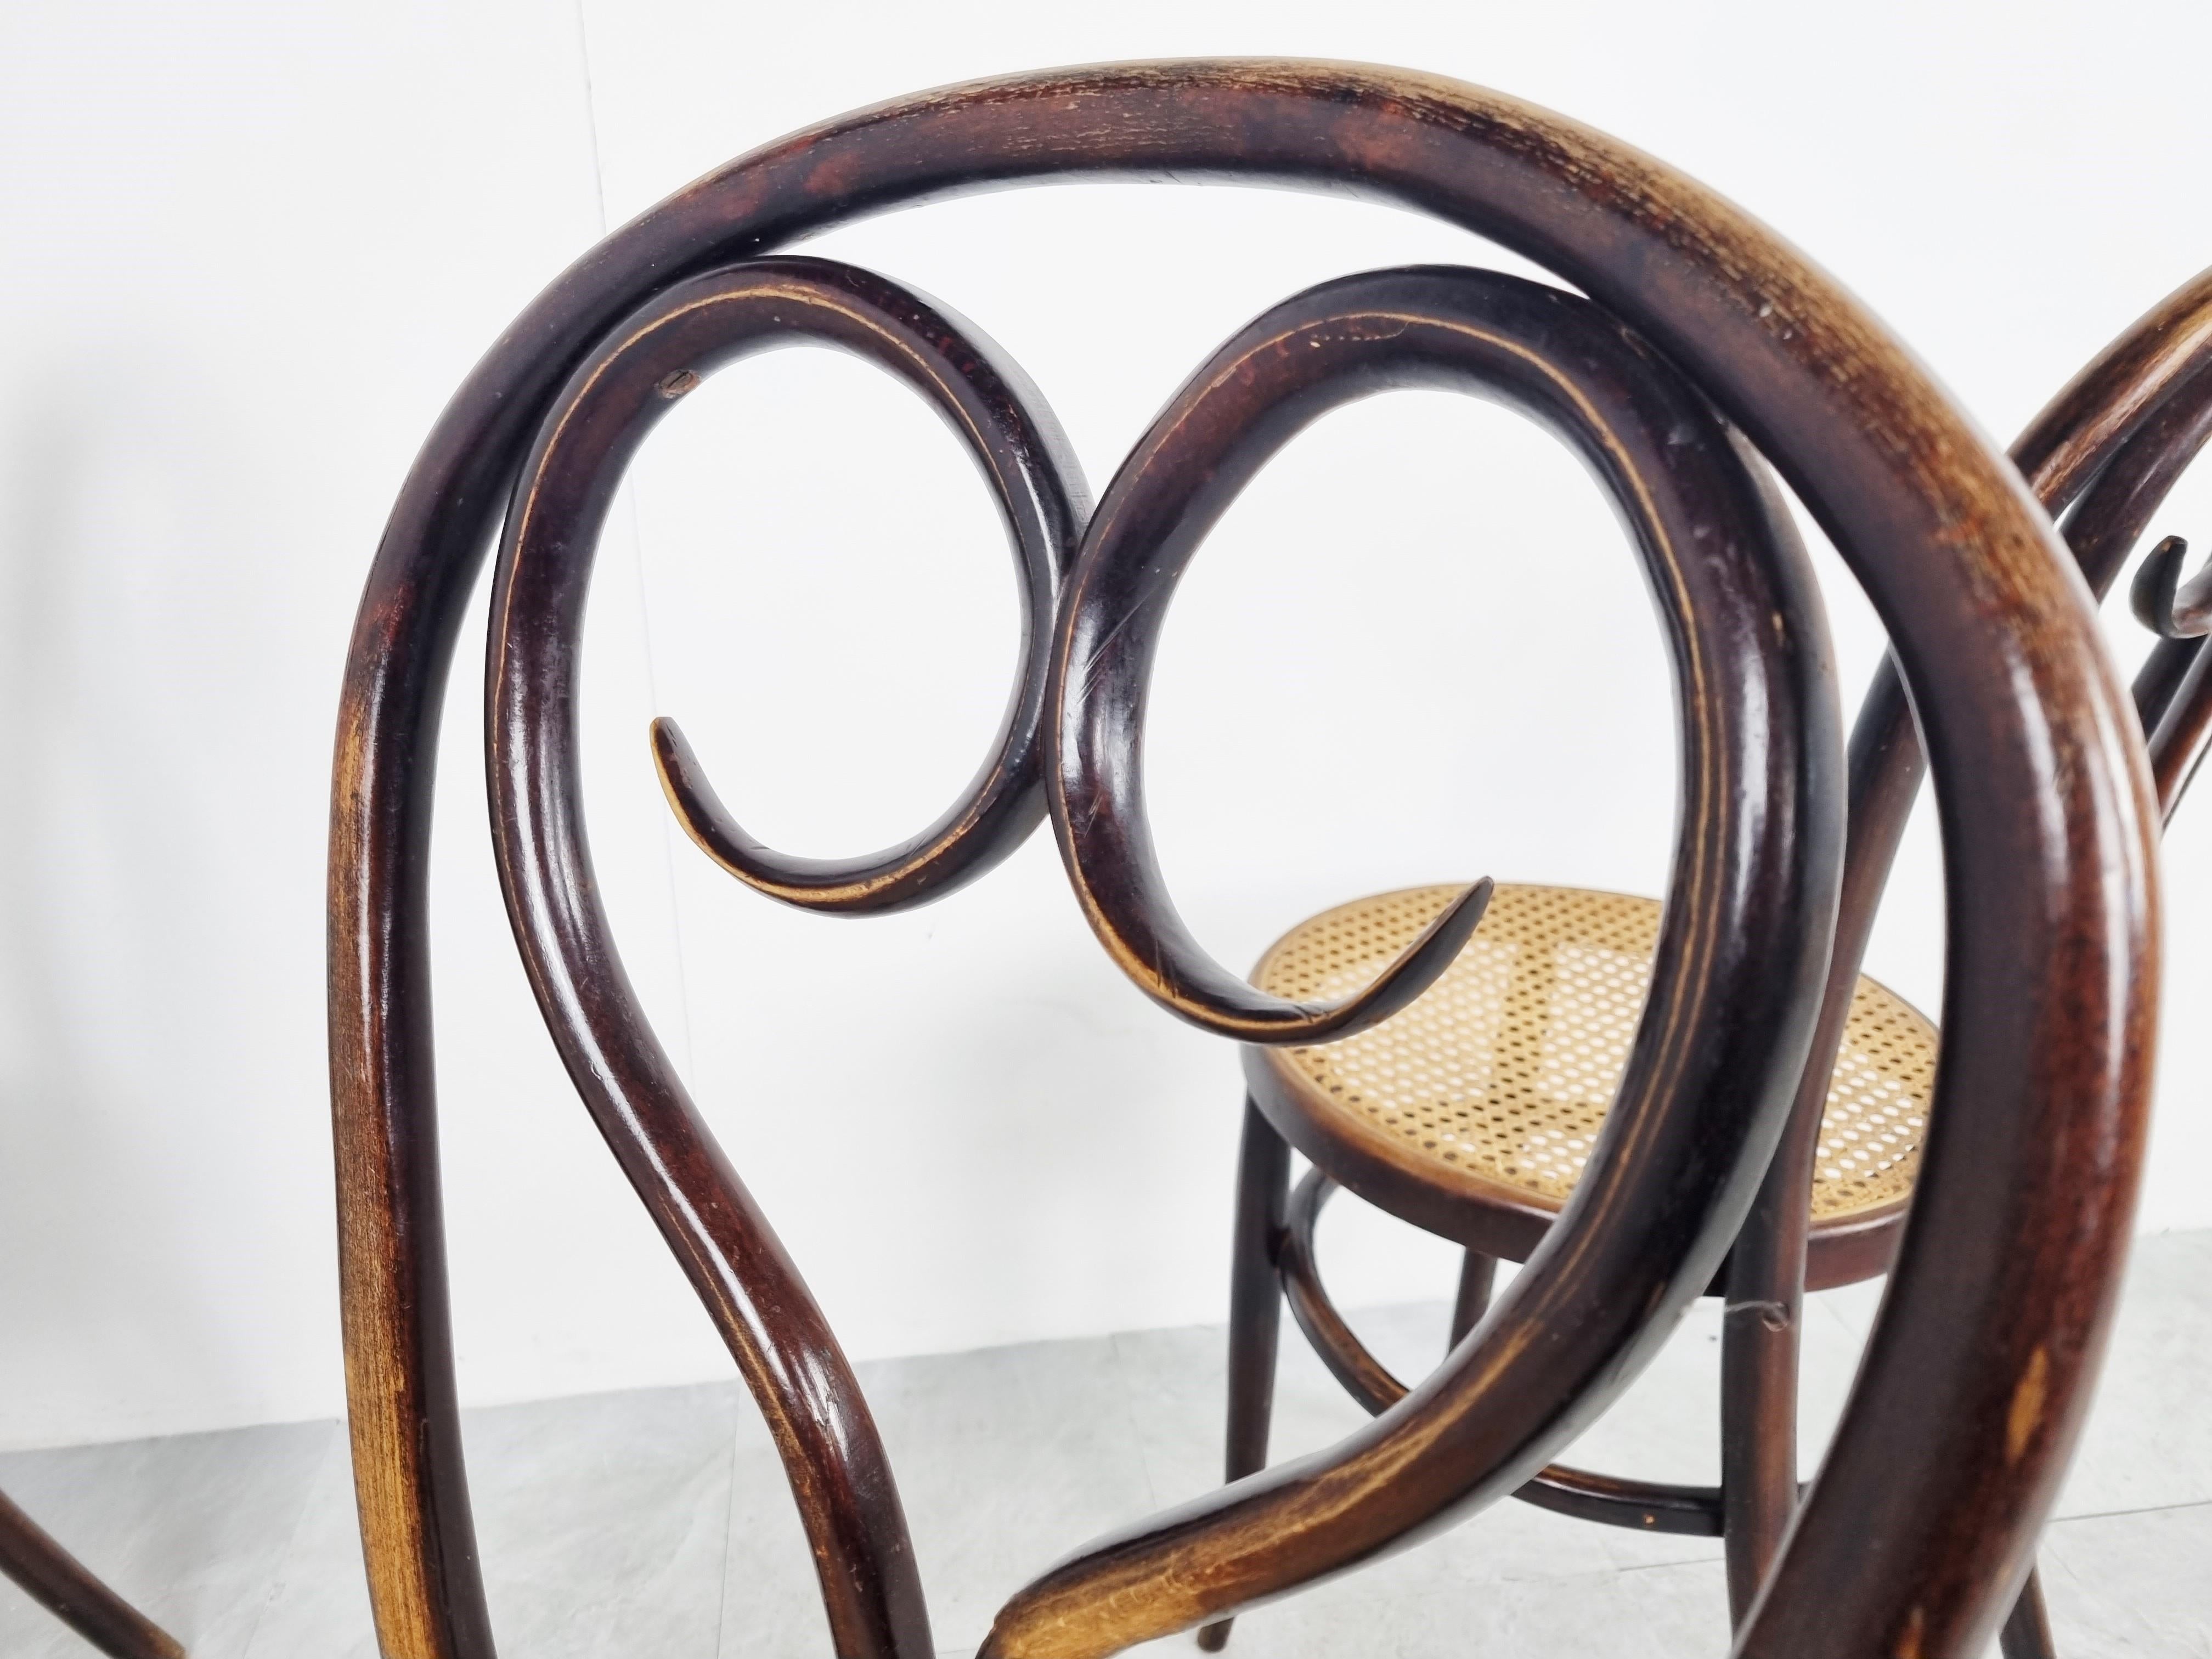 Cane Thonet style bentwood Dining Chairs, 1920s